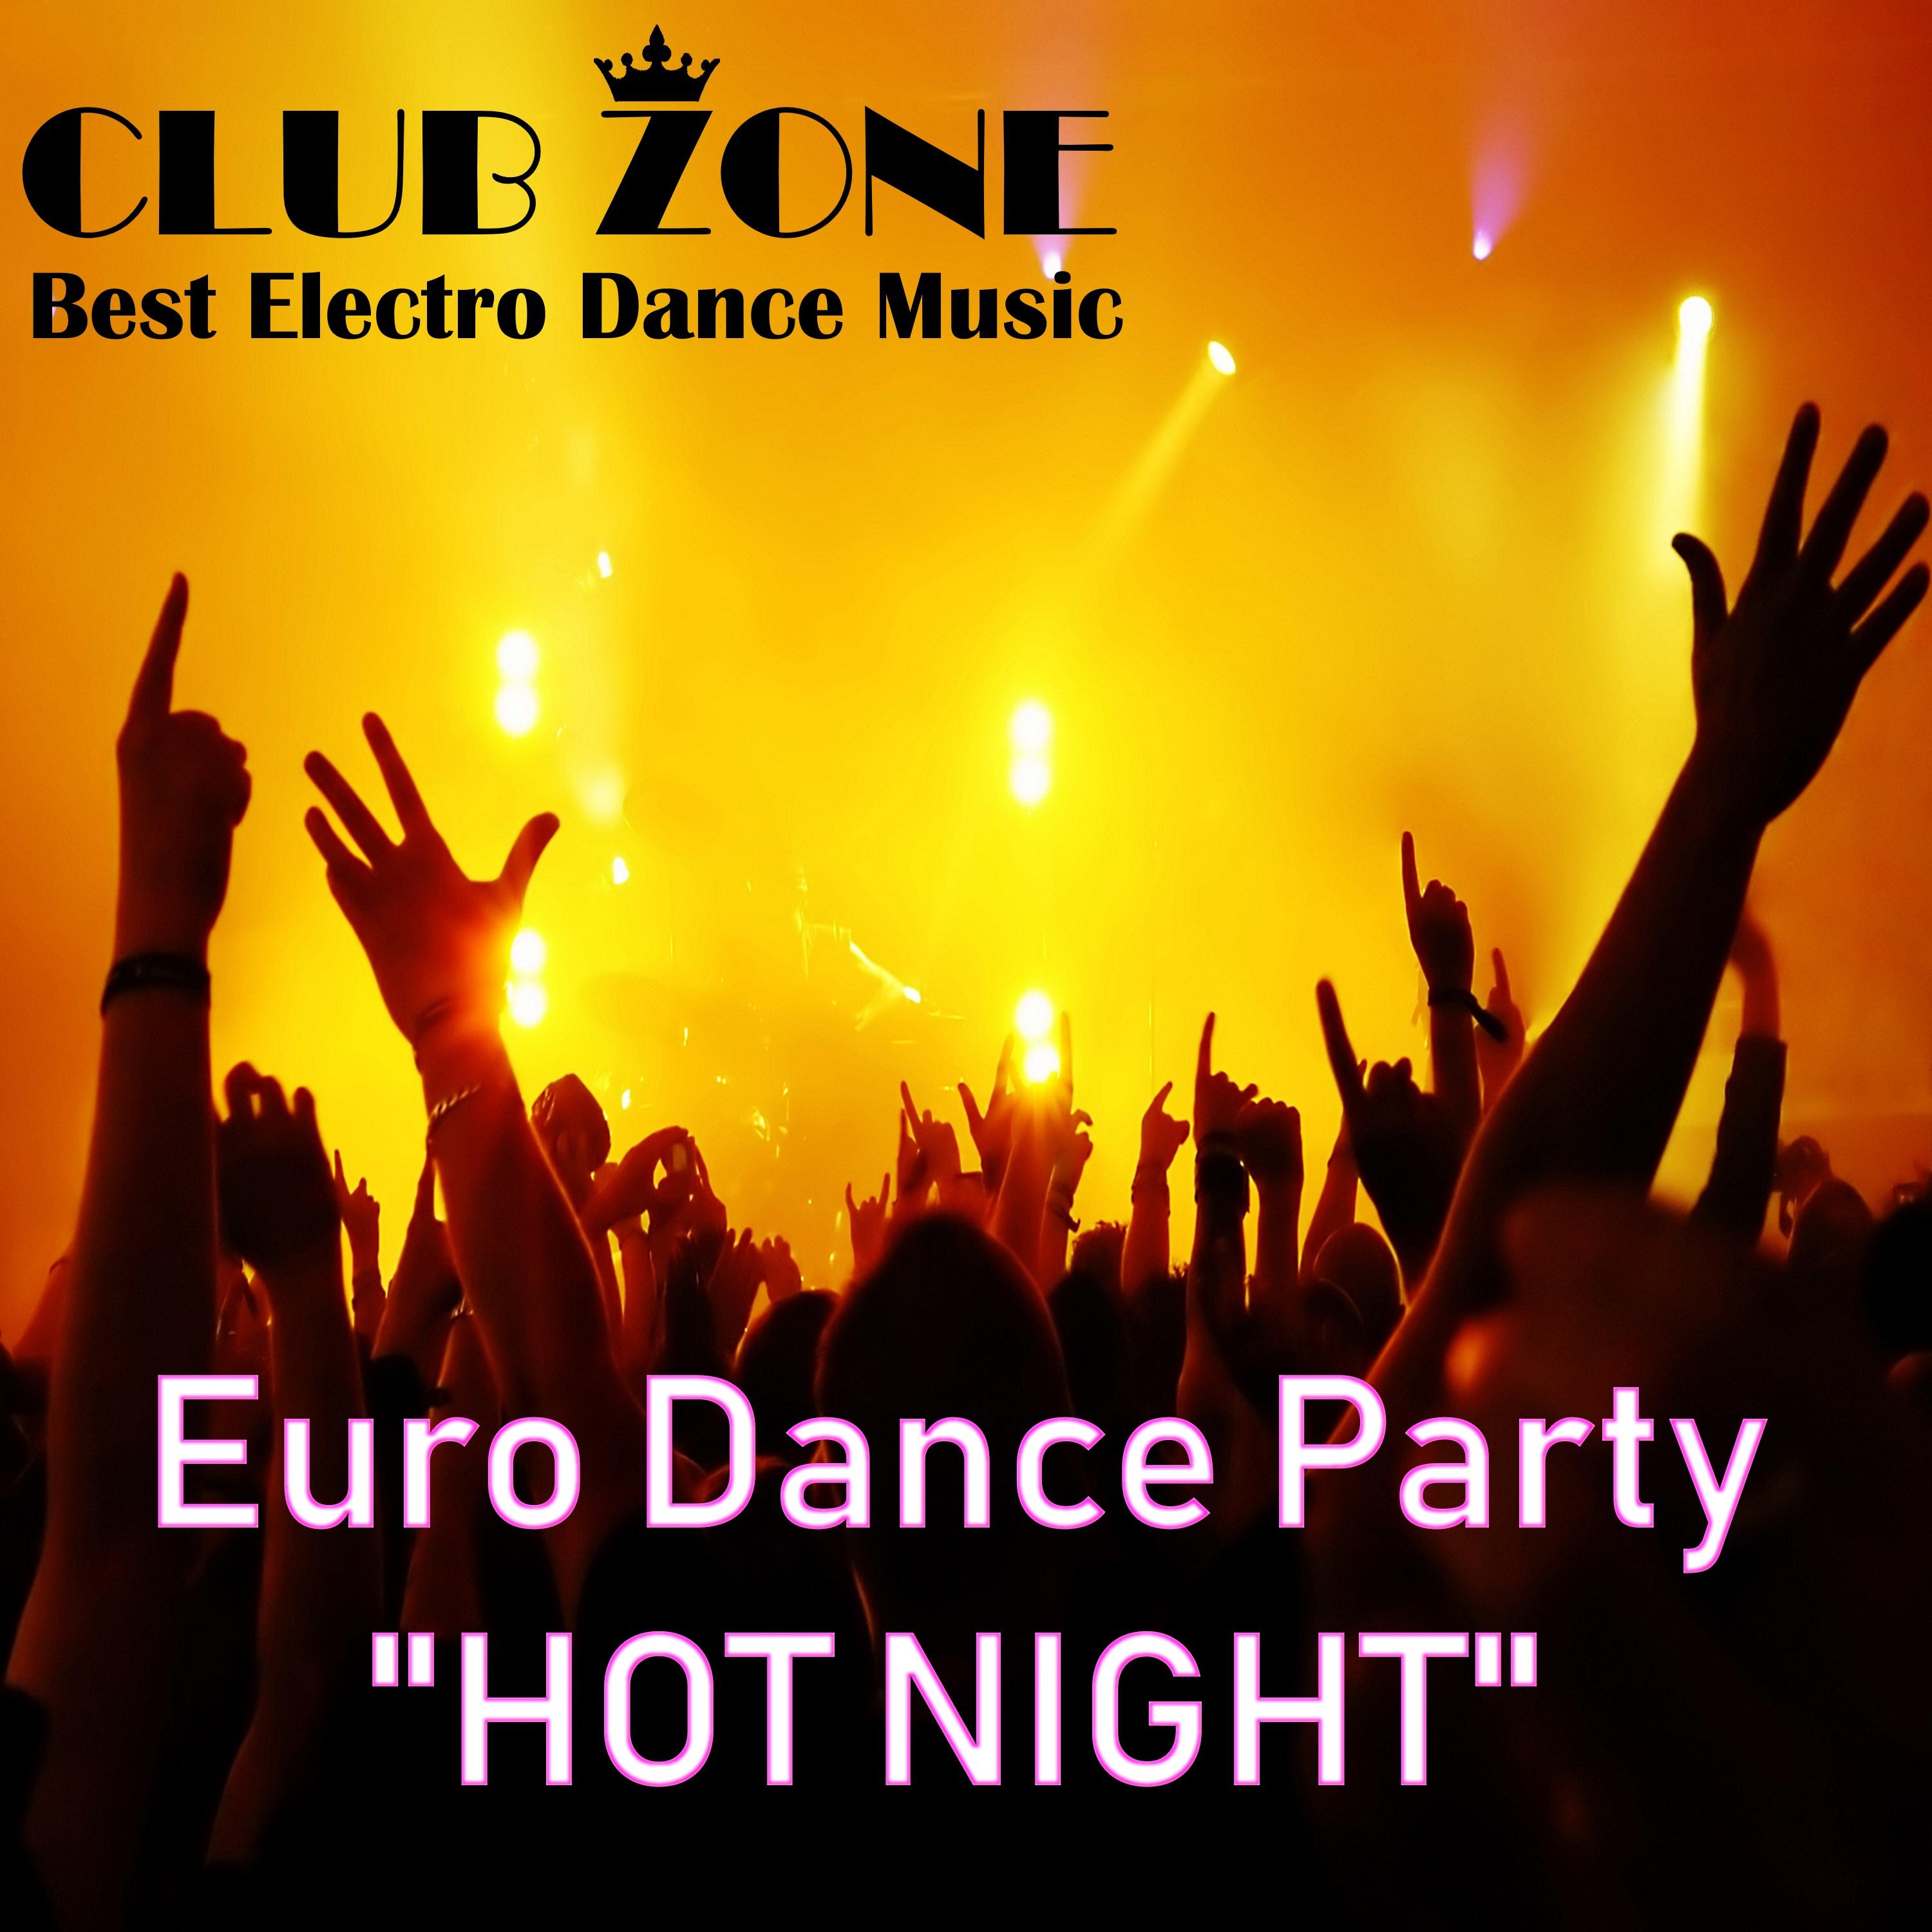 Euro Dance Party "Hot Night"